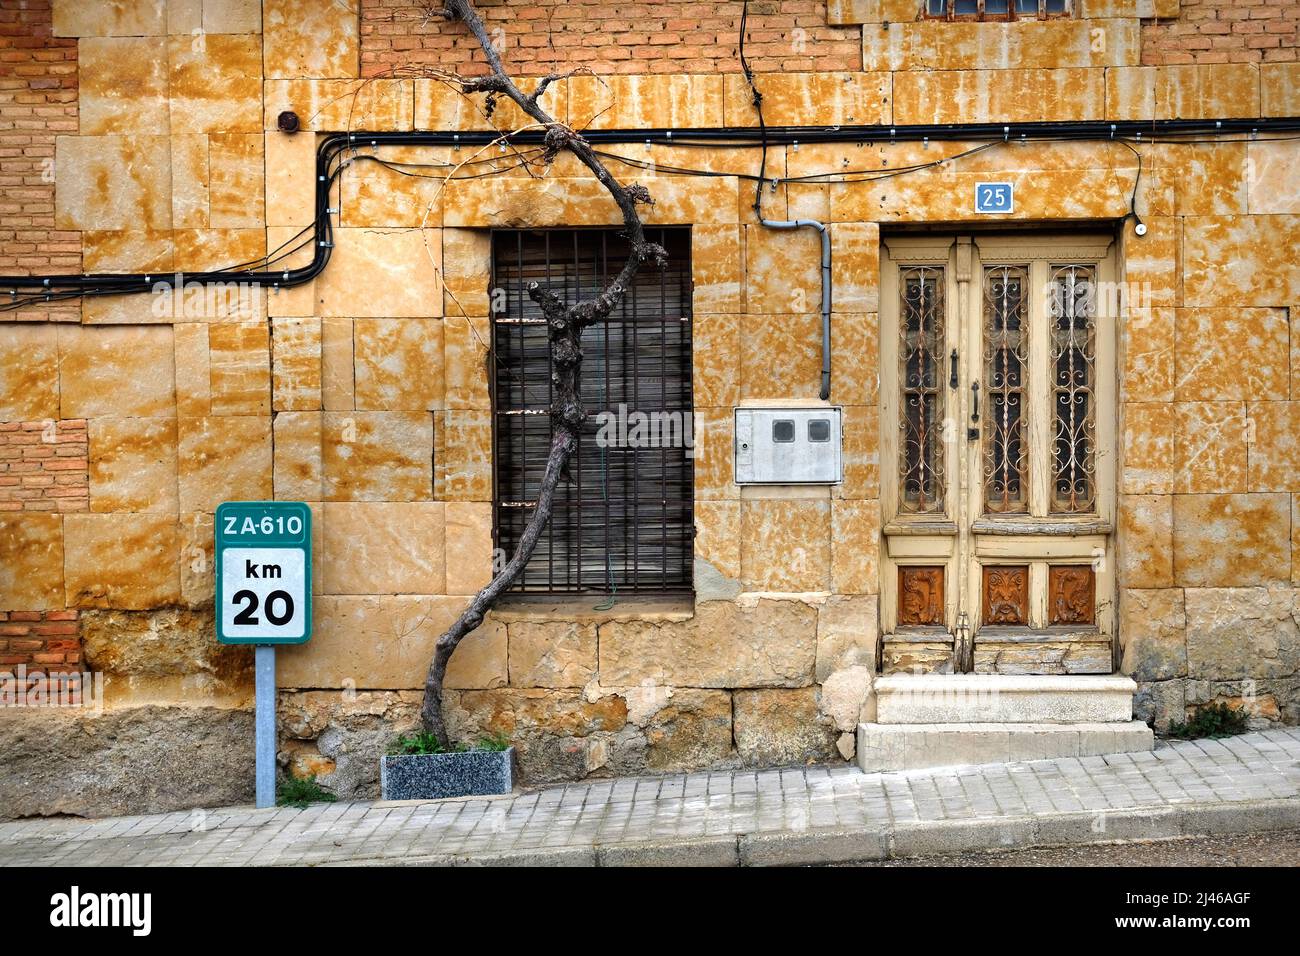 One of the beautiful doors on the buildings of Venialbo, Zamora, Castile and León, Spain. Stock Photo